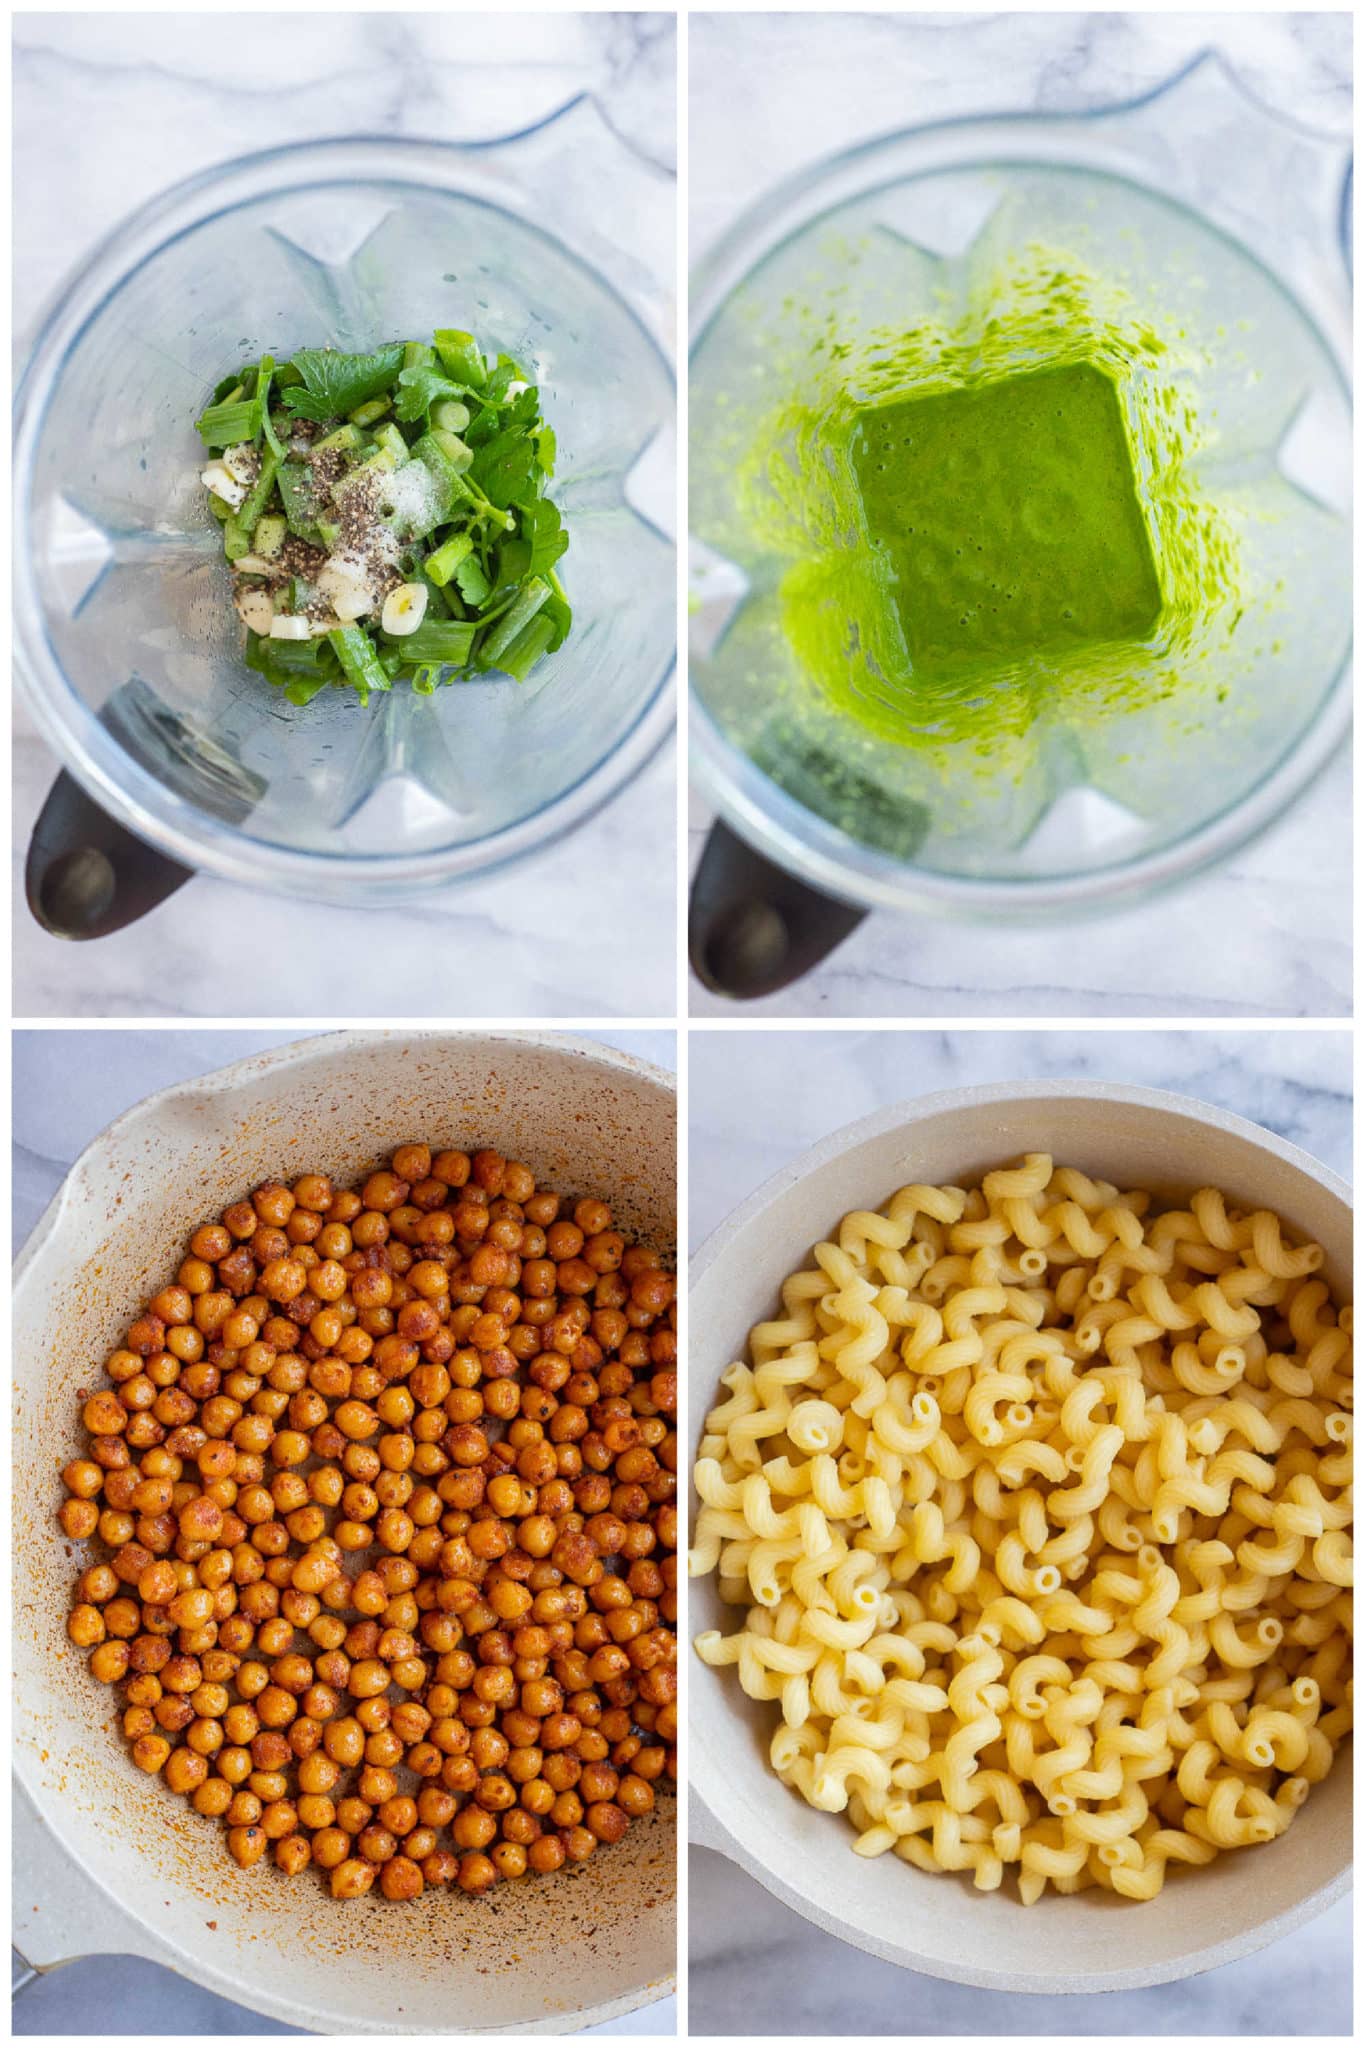 showing how to make the herby lemon jalapeno dressing, crispy chickpeas and pasta